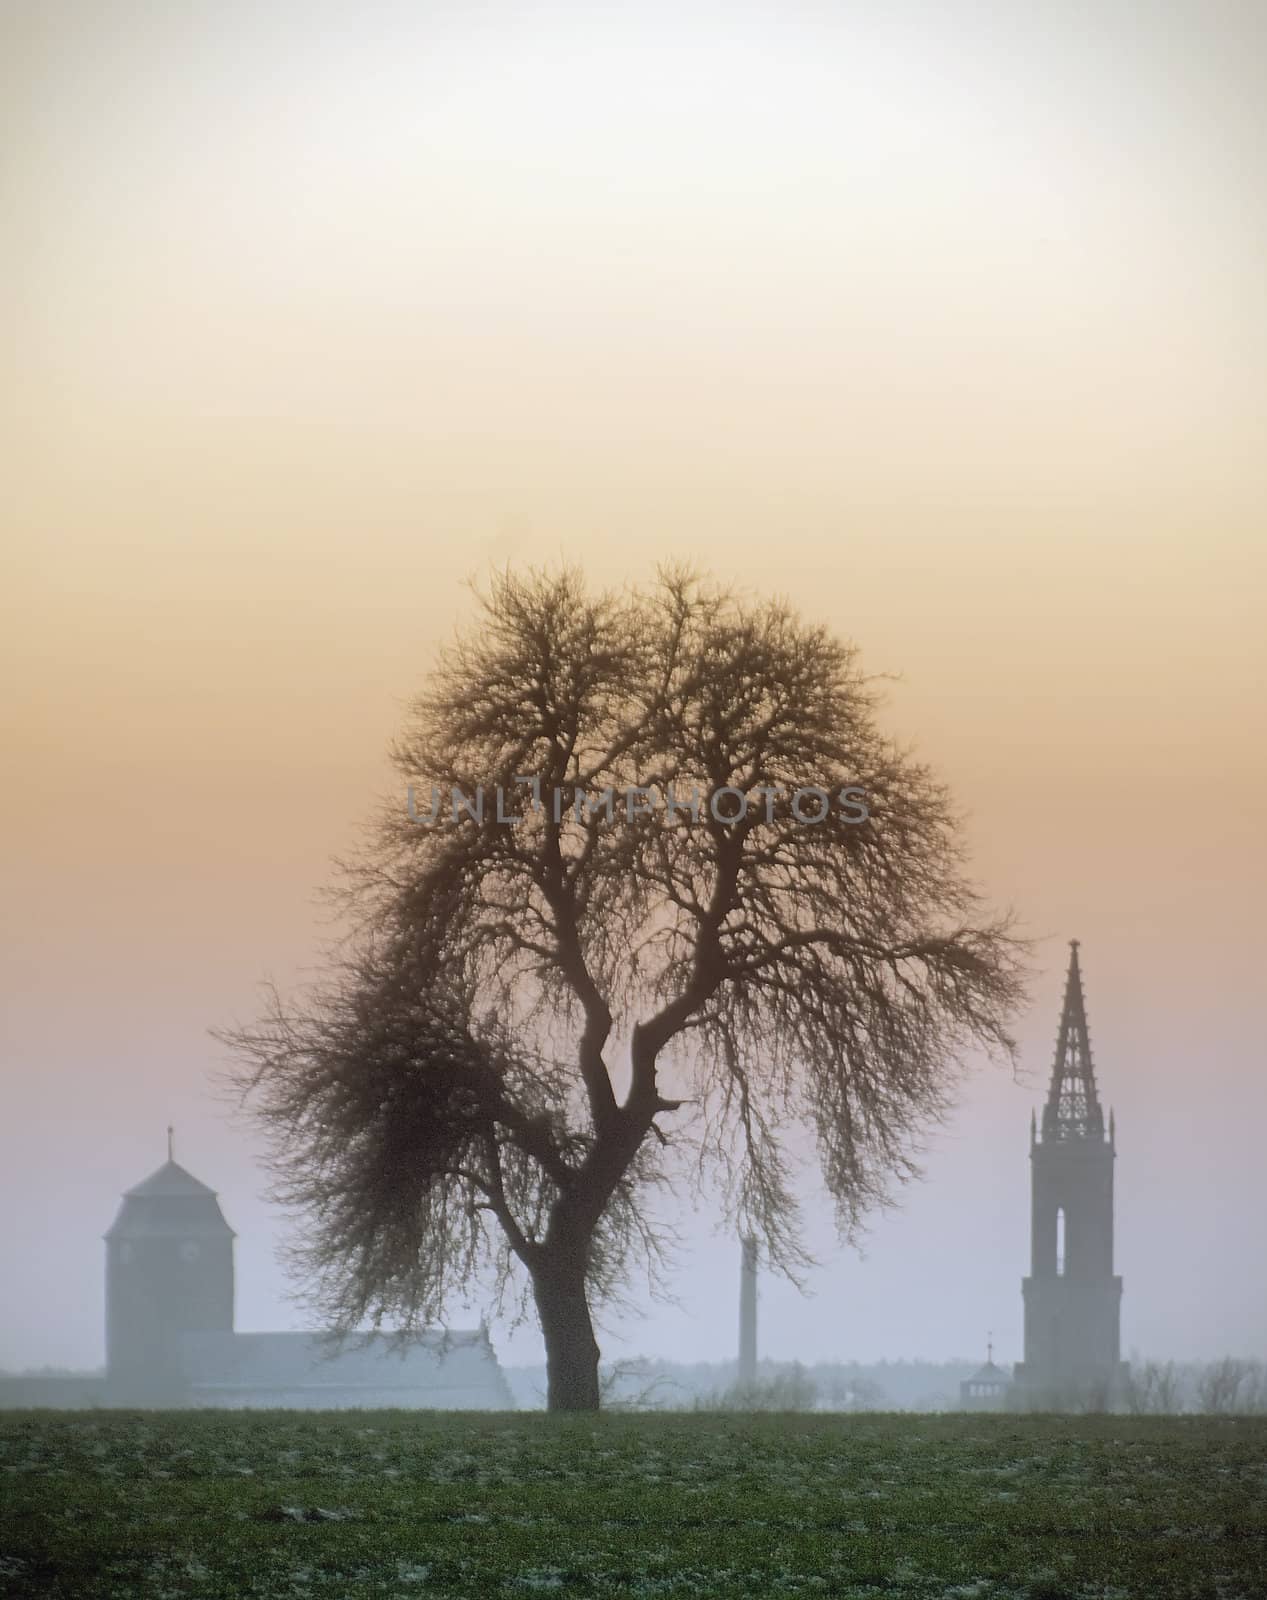 tree and towers by Mariusz1962